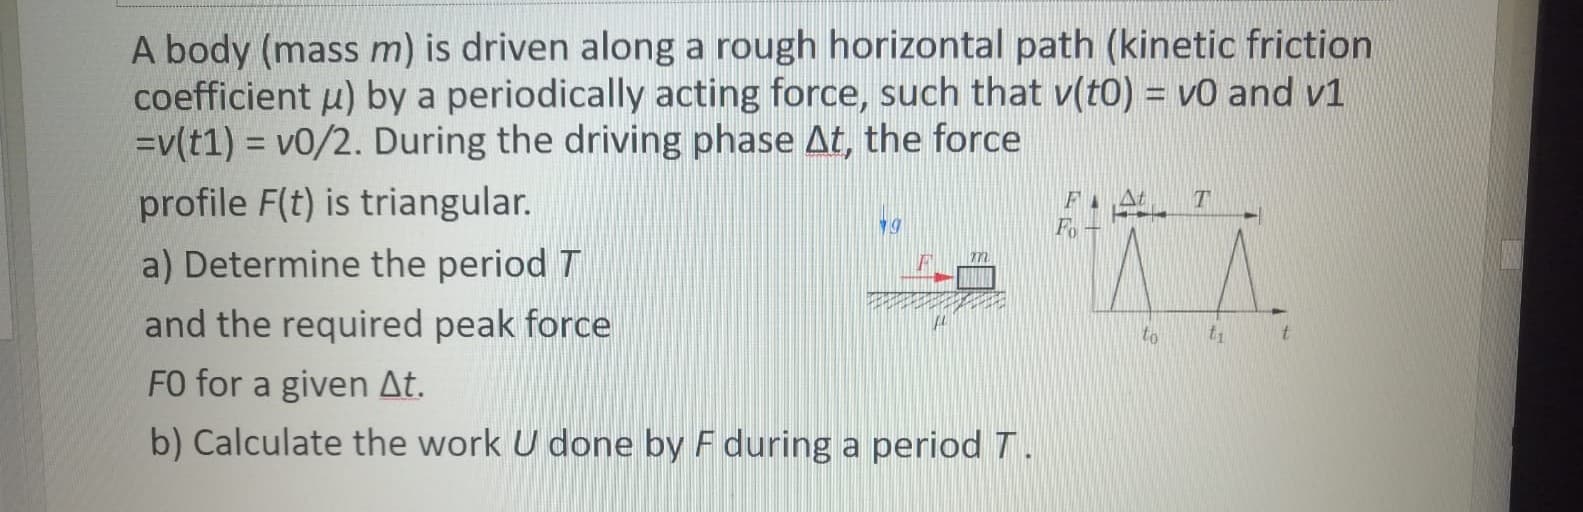 A body (mass m) is driven along a rough horizontal path (kinetic friction
coefficient u) by a periodically acting force, such that v(t0) = v0 and v1
=v(t1) = v0/2. During the driving phase At, the force
profile F(t) is triangular.
a) Determine the period T
and the required peak force
T
Fo
to
t1
FO for a given At.
b) Calculate the work U done by F during a period T.
